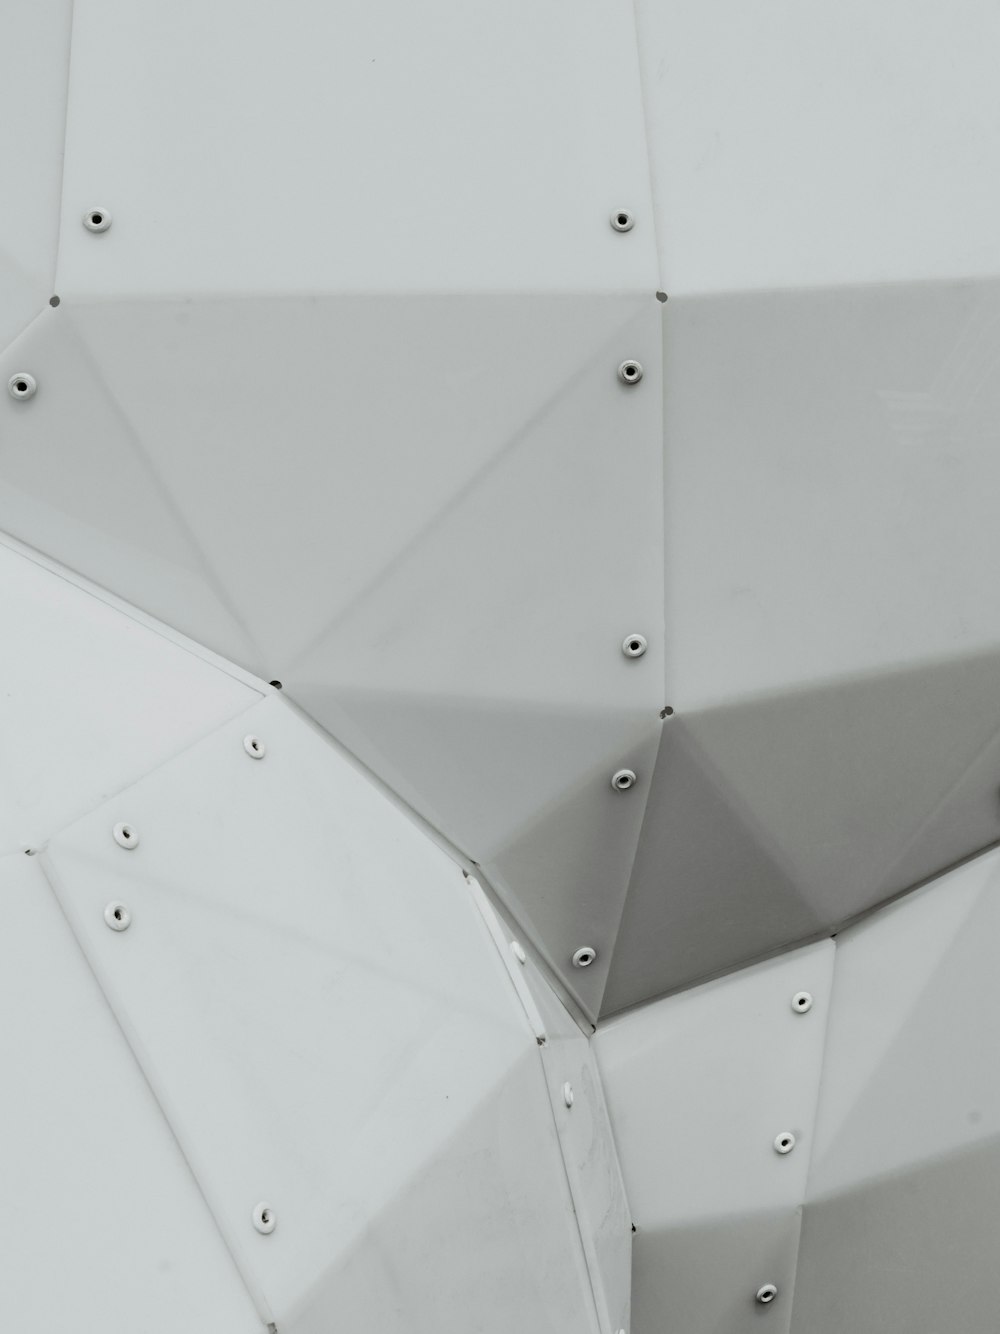 a close up of a metal structure with rivets